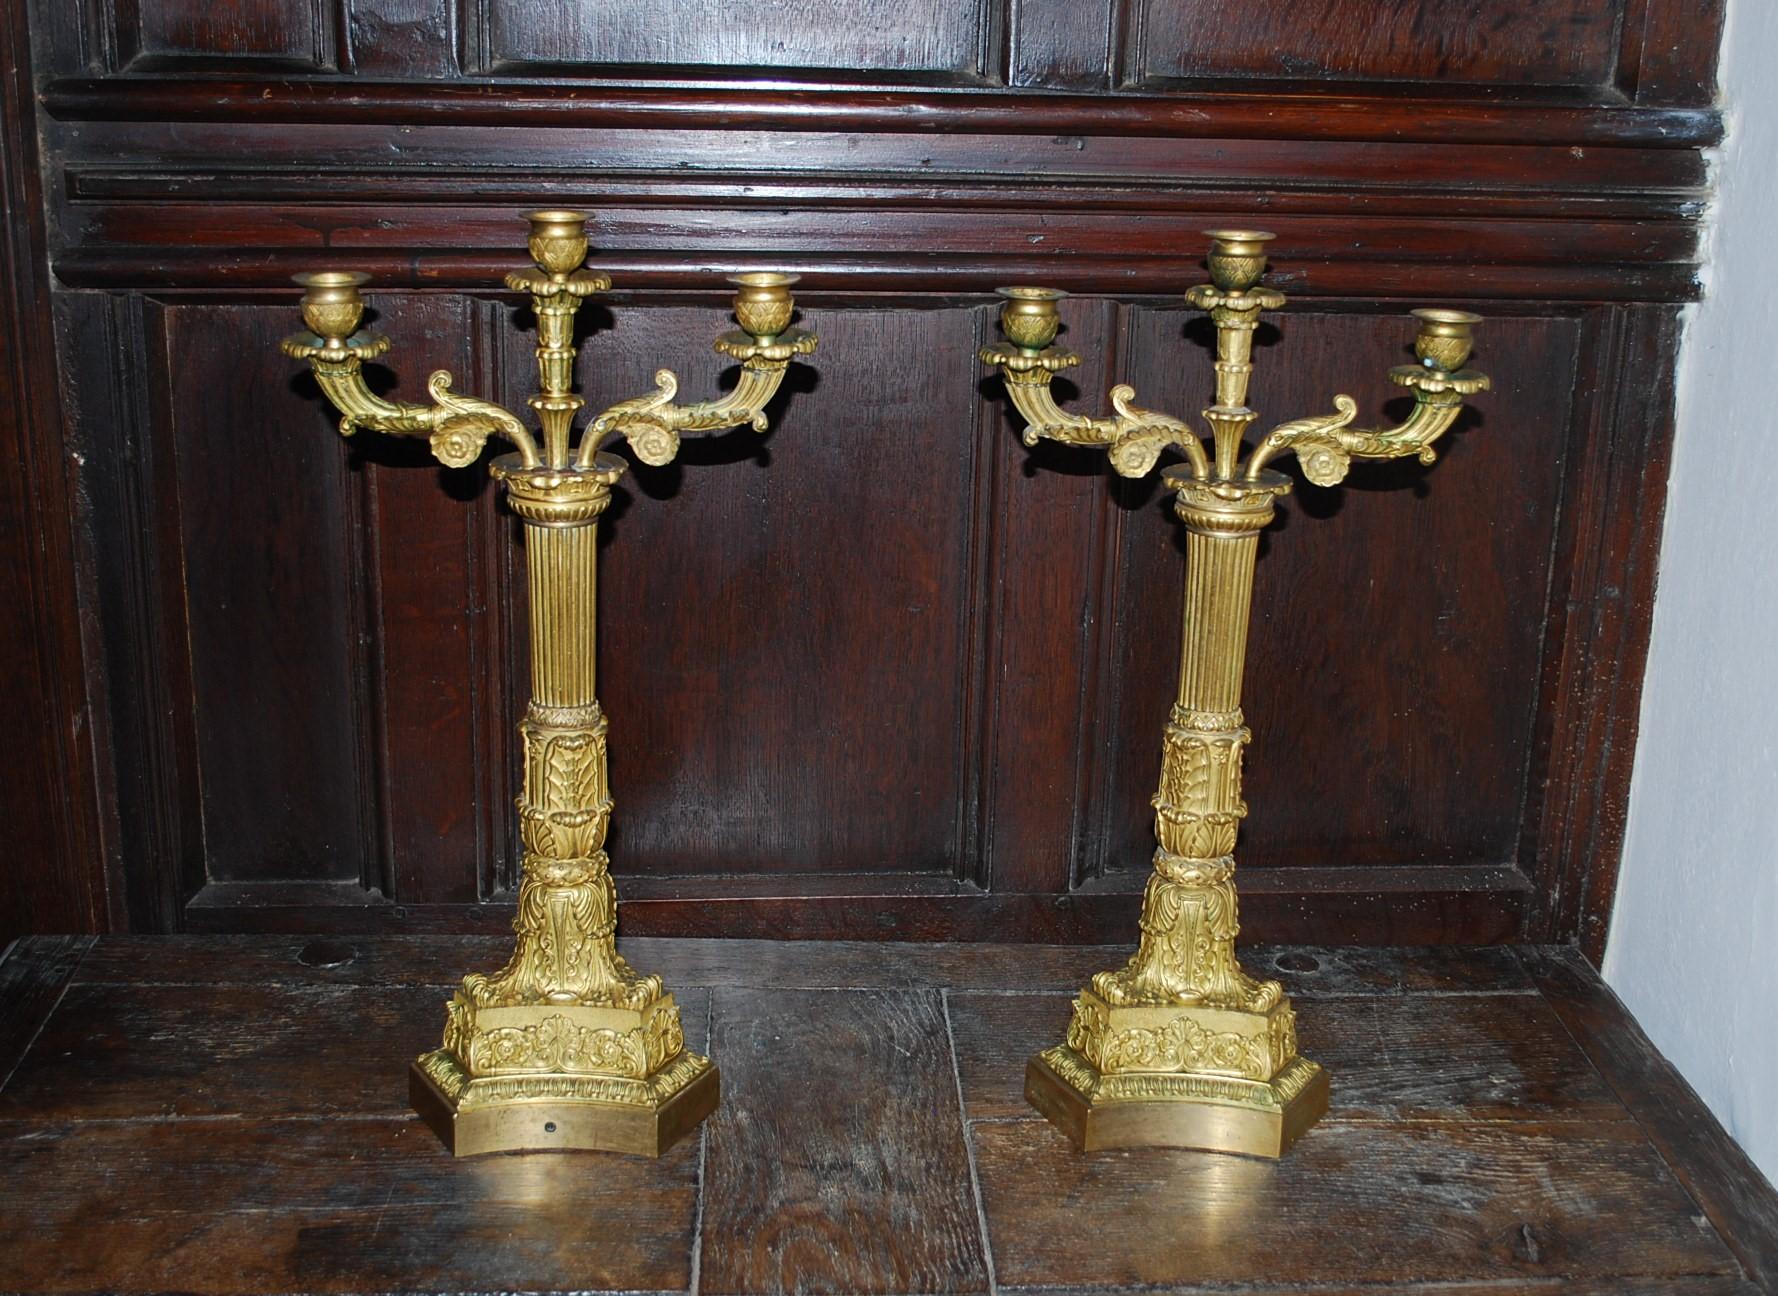 Hutton-Clarke Antiques is delighted to present a magnificent pair of French Empire Gilt Bronze Candelabra, originating from around 1890. These candelabra are a testament to the exquisite craftsmanship of the Empire era, showcasing meticulous casting